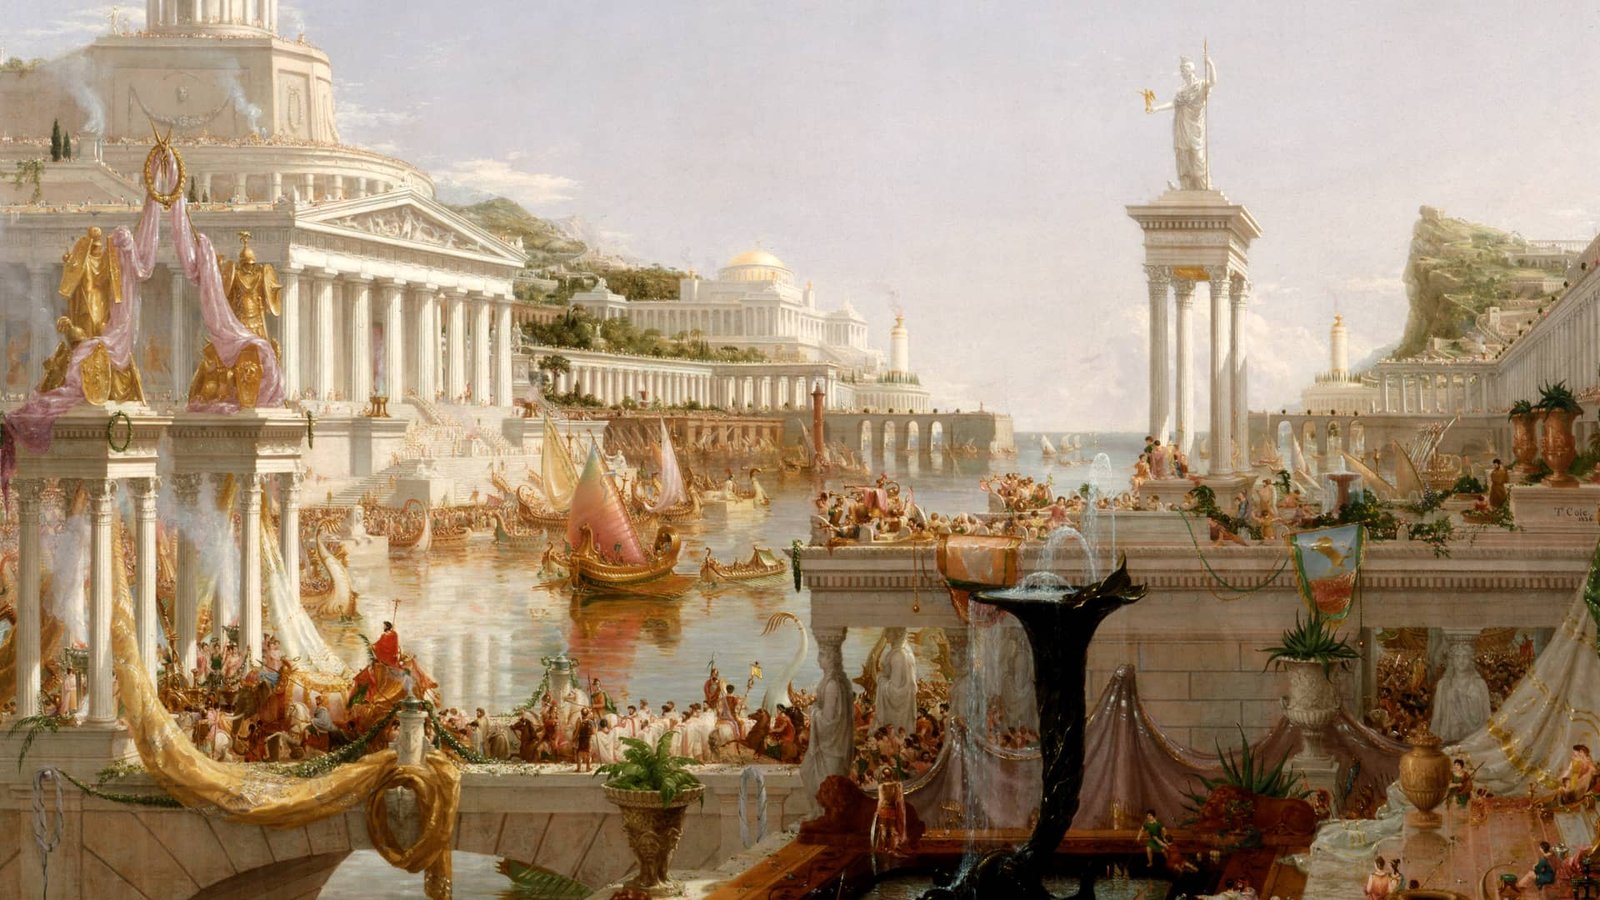 Timeline of the Roman Empire: Major Emperors and Events